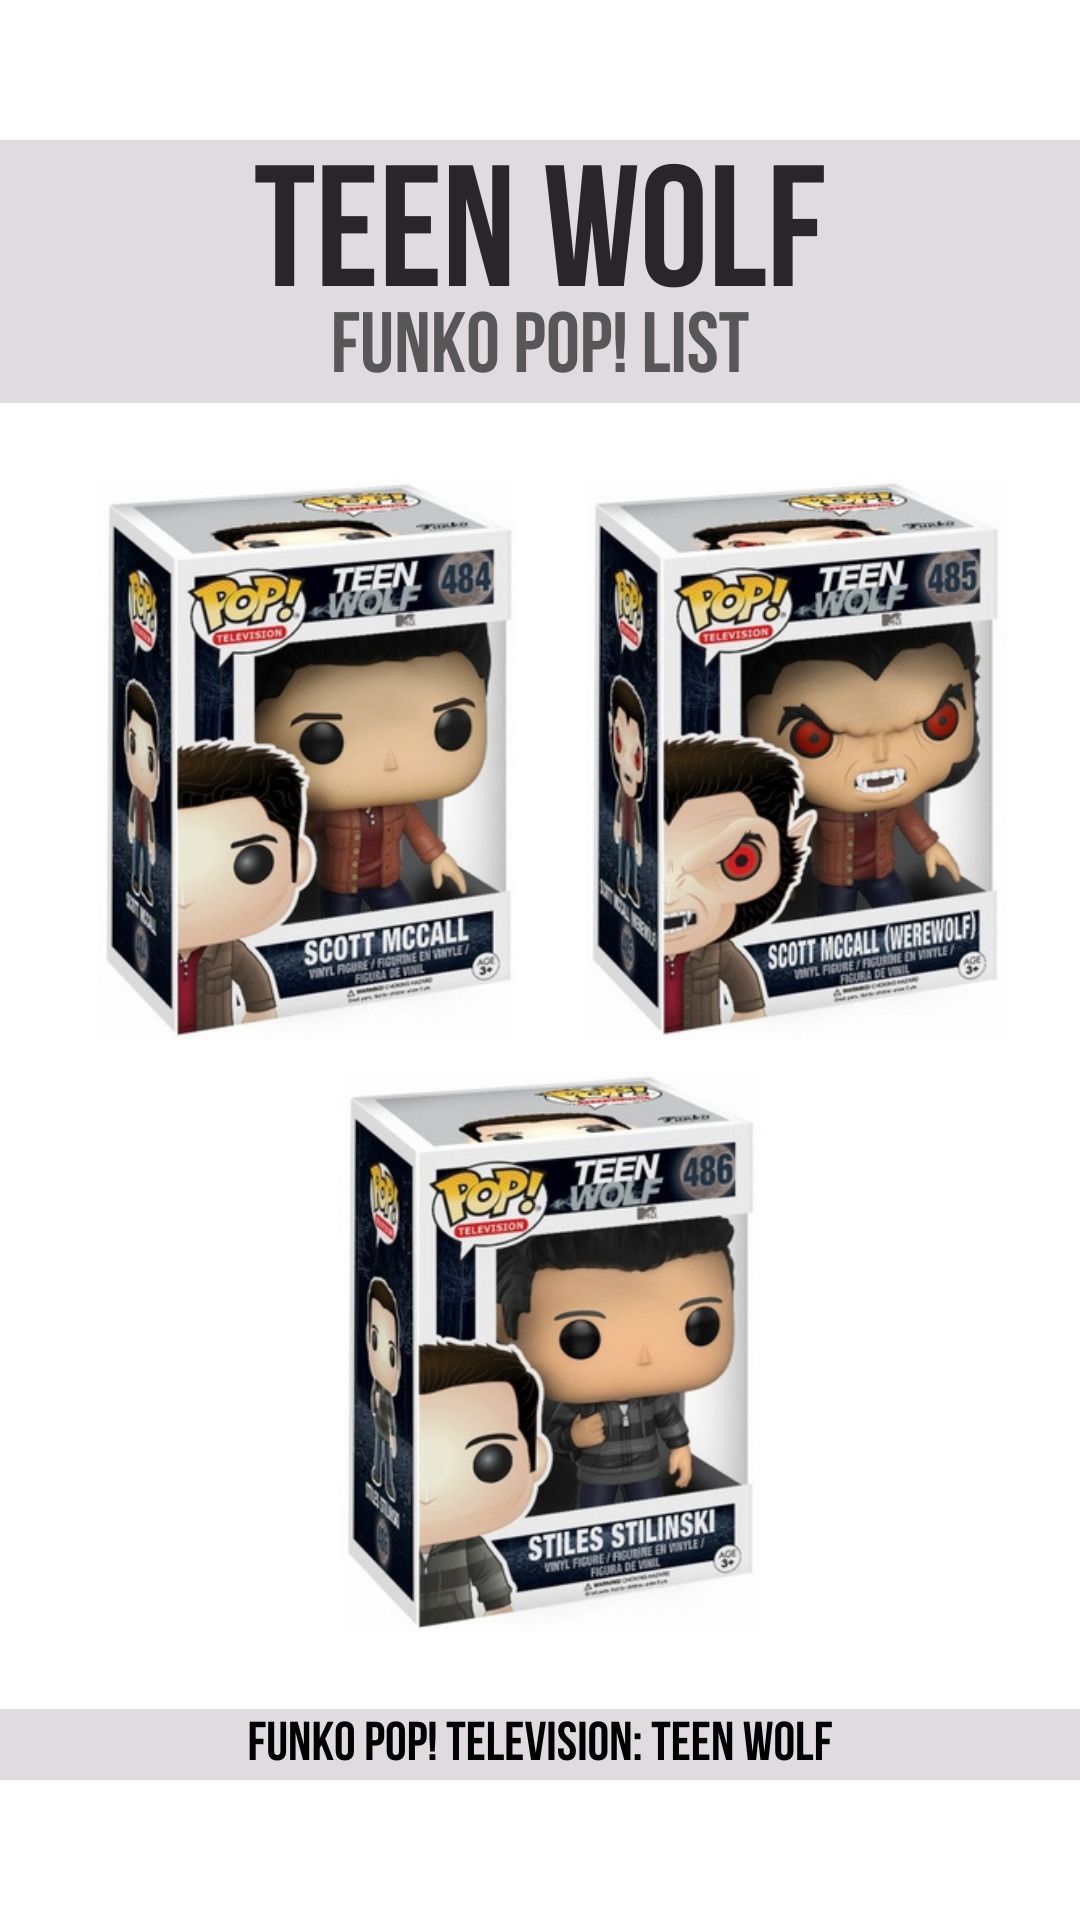 Teen Wolf Funko Pop List of Figures with Boxes